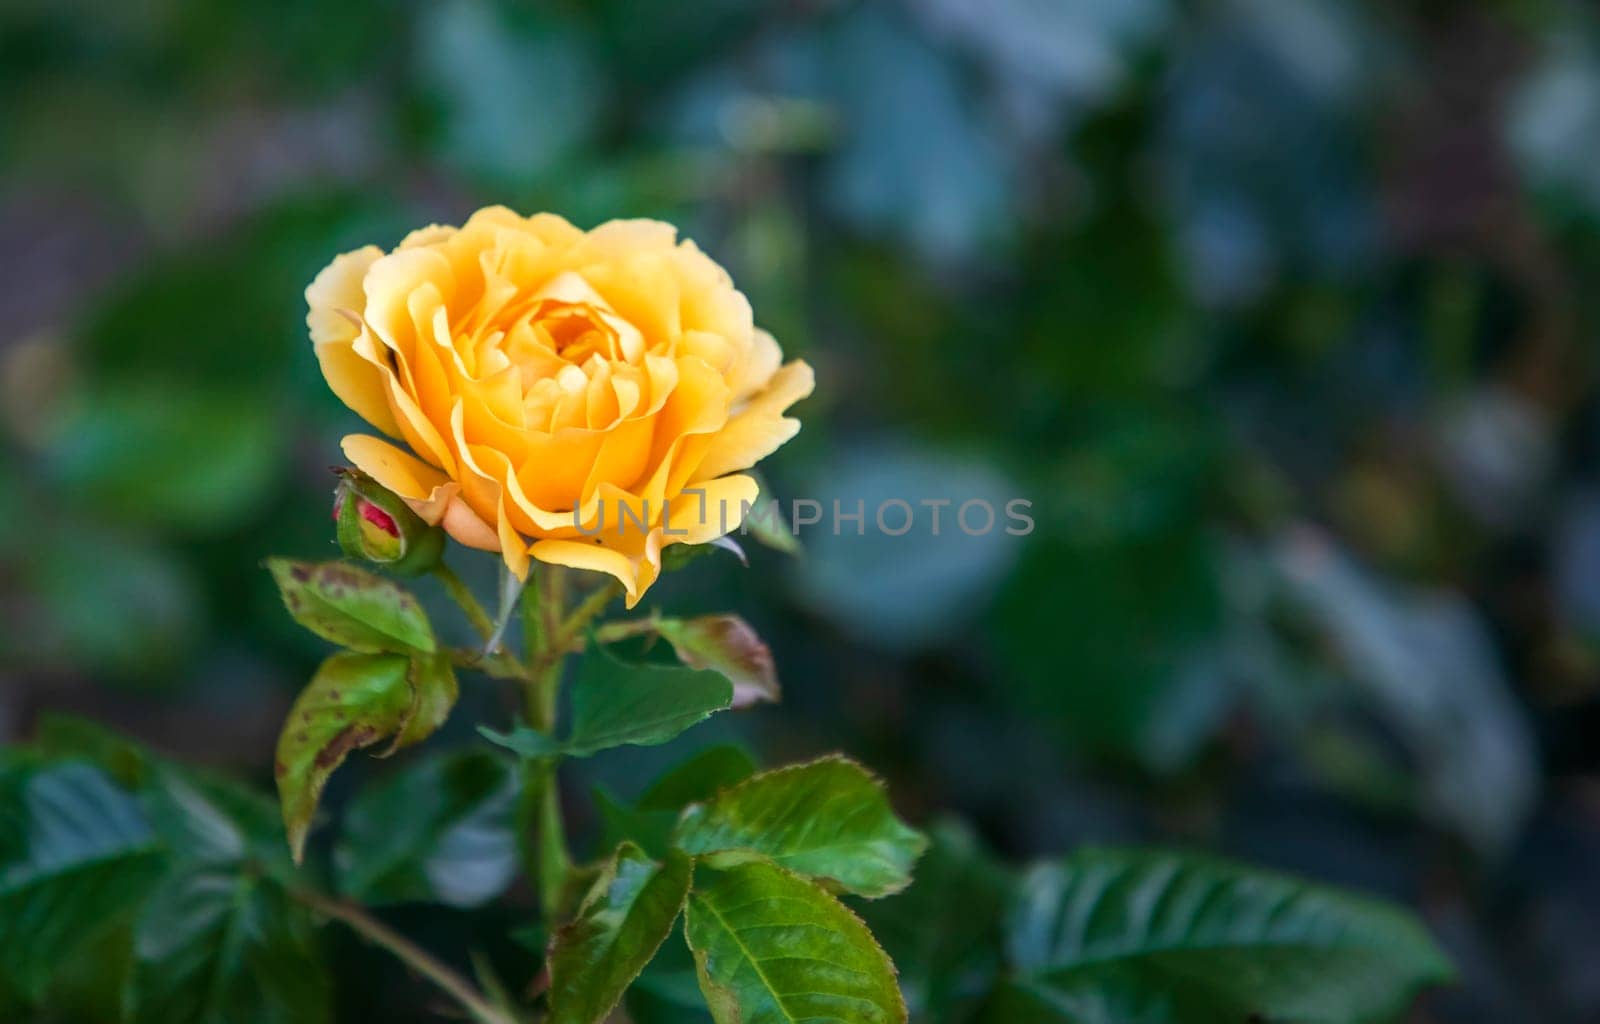 Beauty yellow rose at blurred background.